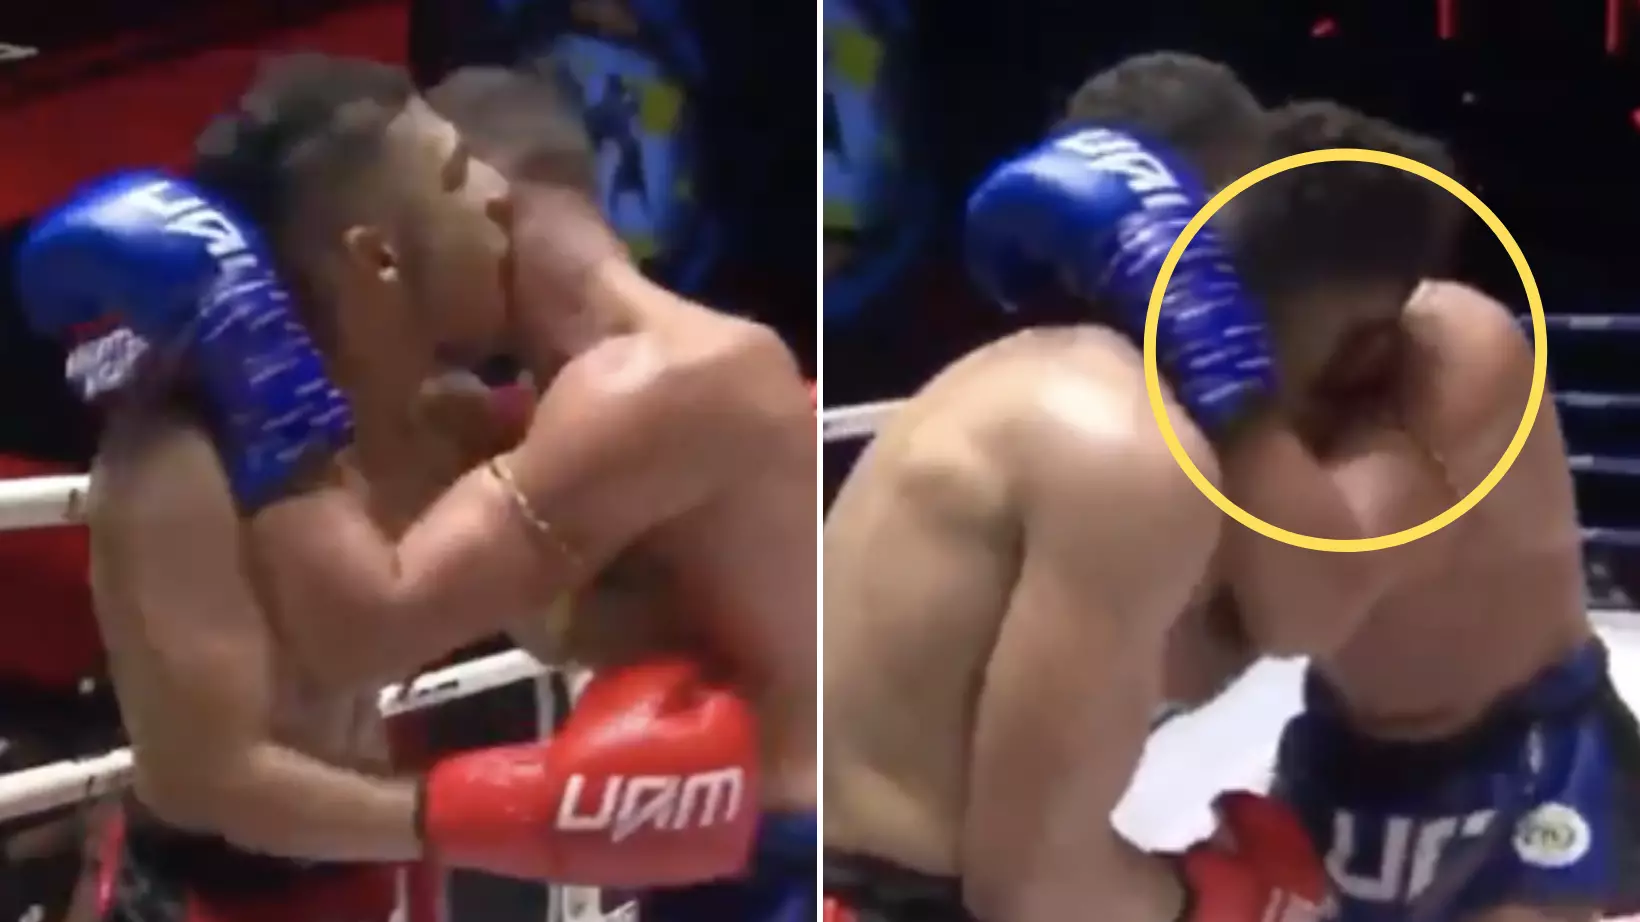 Shocking Video Shows Muay Thai Fighter Channeling His Inner Mike Tyson, Bites Opponent In Extraordinary Scenes